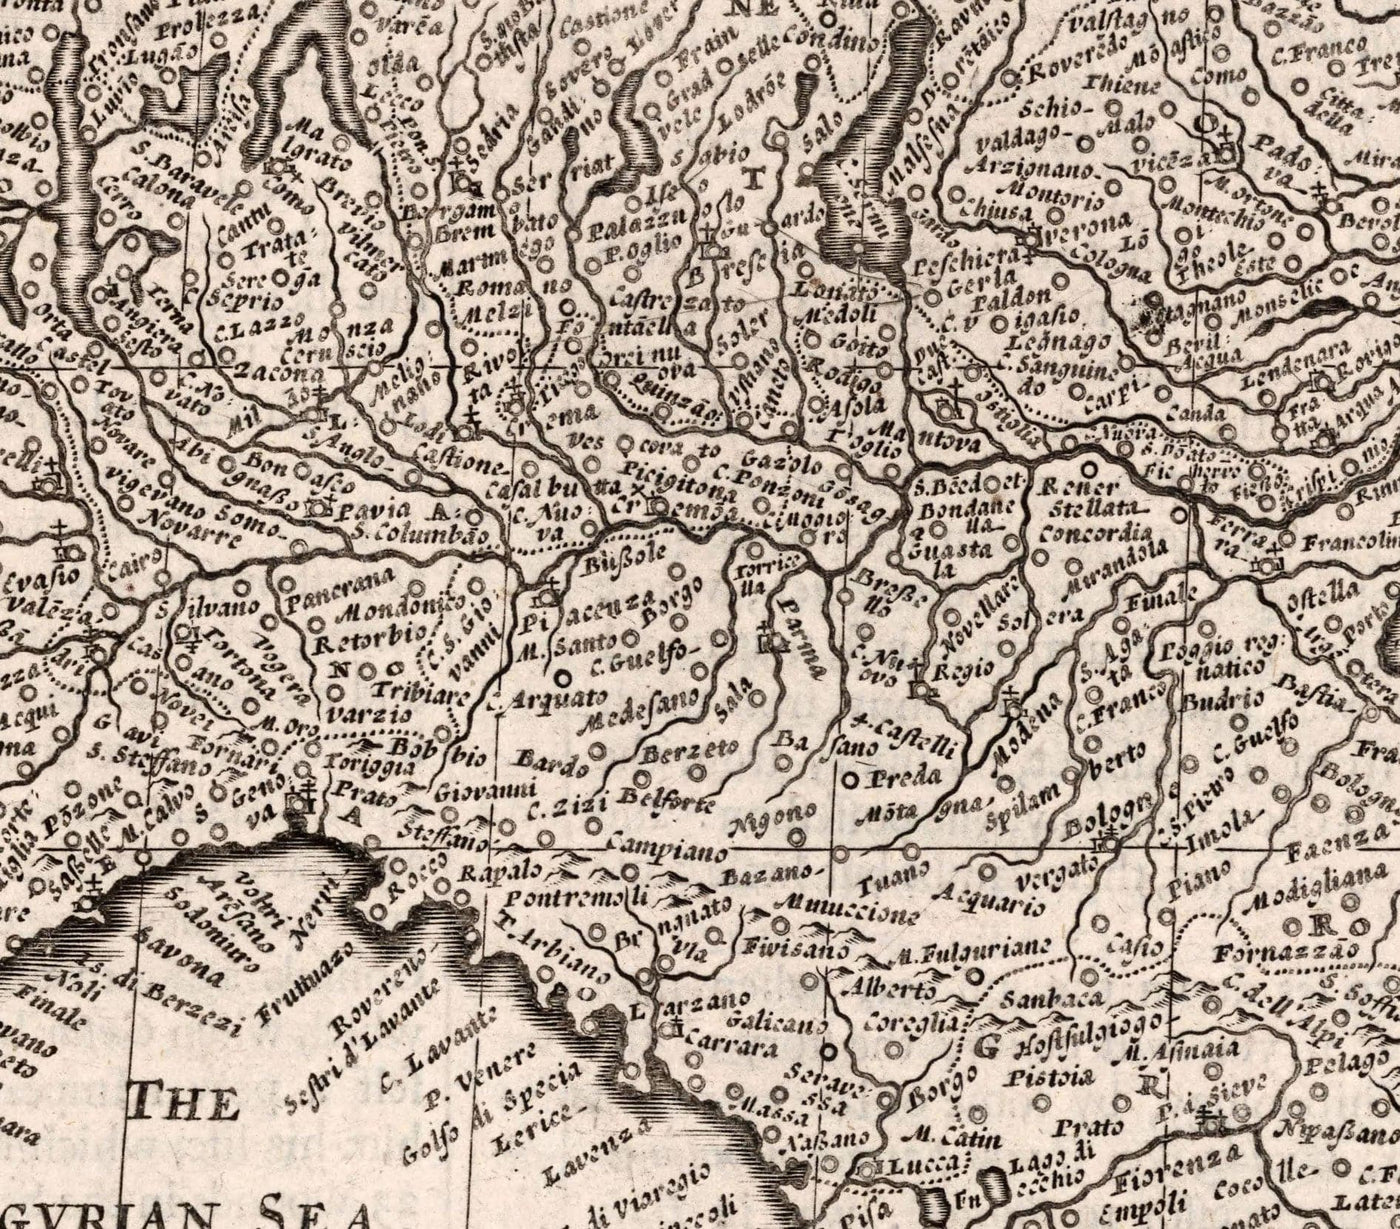 Old Monochrome Map of Italy, 1627 by John Speed - Corsica, Sardinia, Sicily, Venice, Rome, The Pope